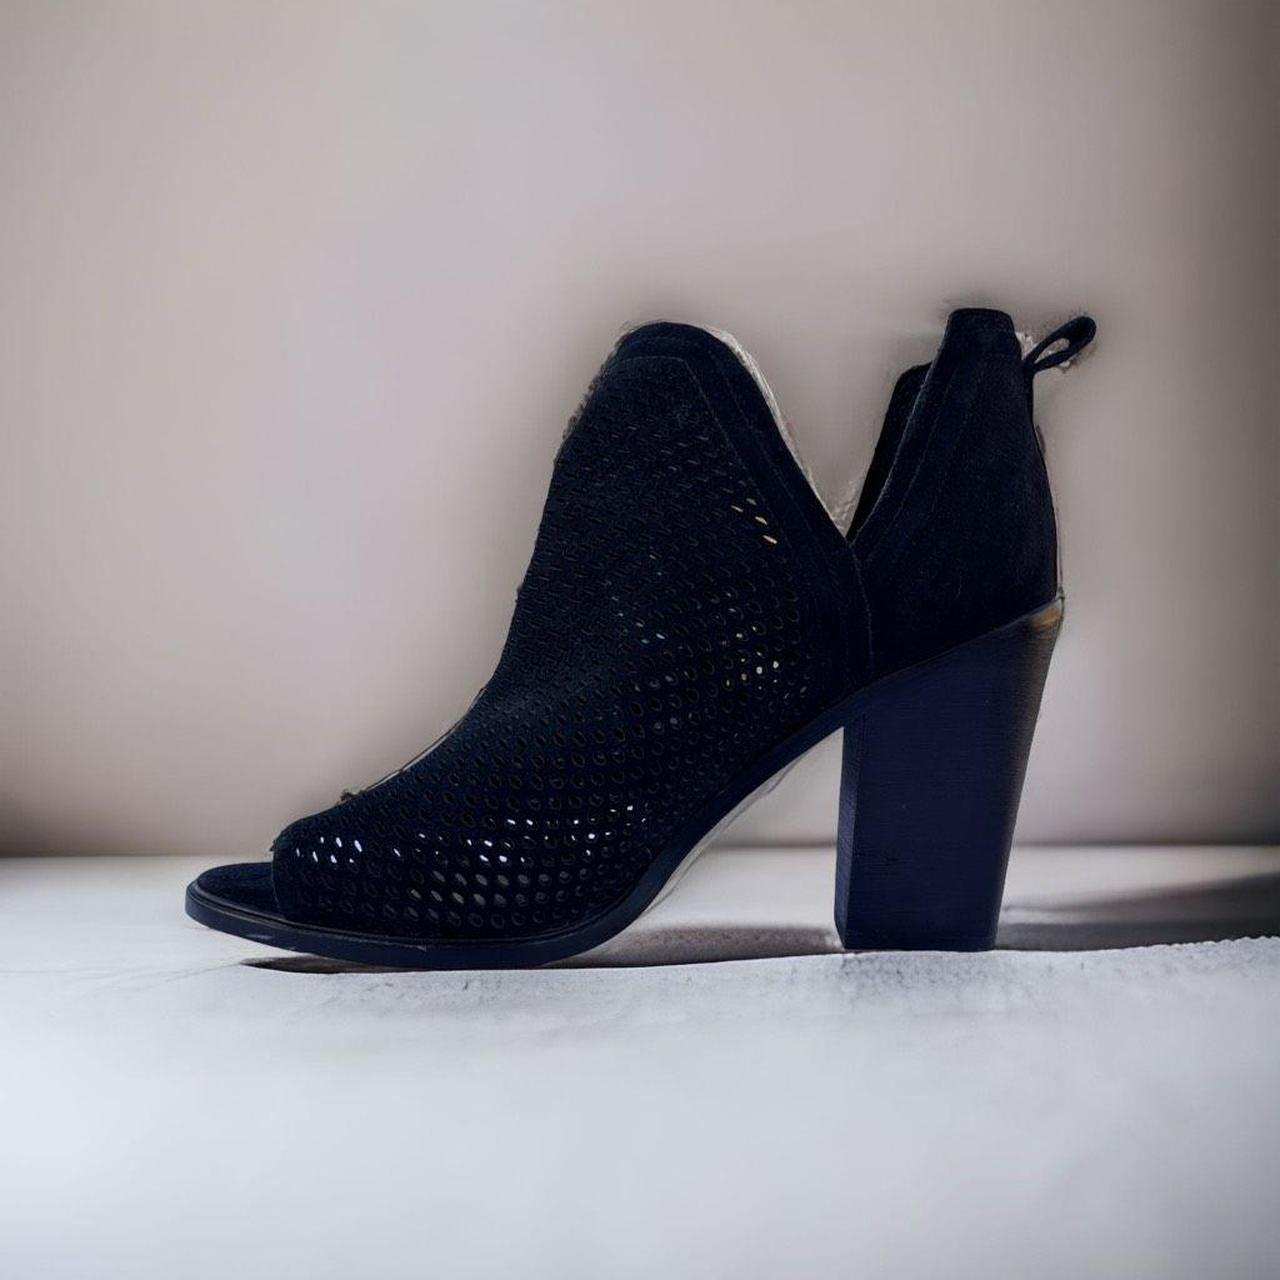 Vince Camuto VC-Kensa perforated ankle boots booties - Depop